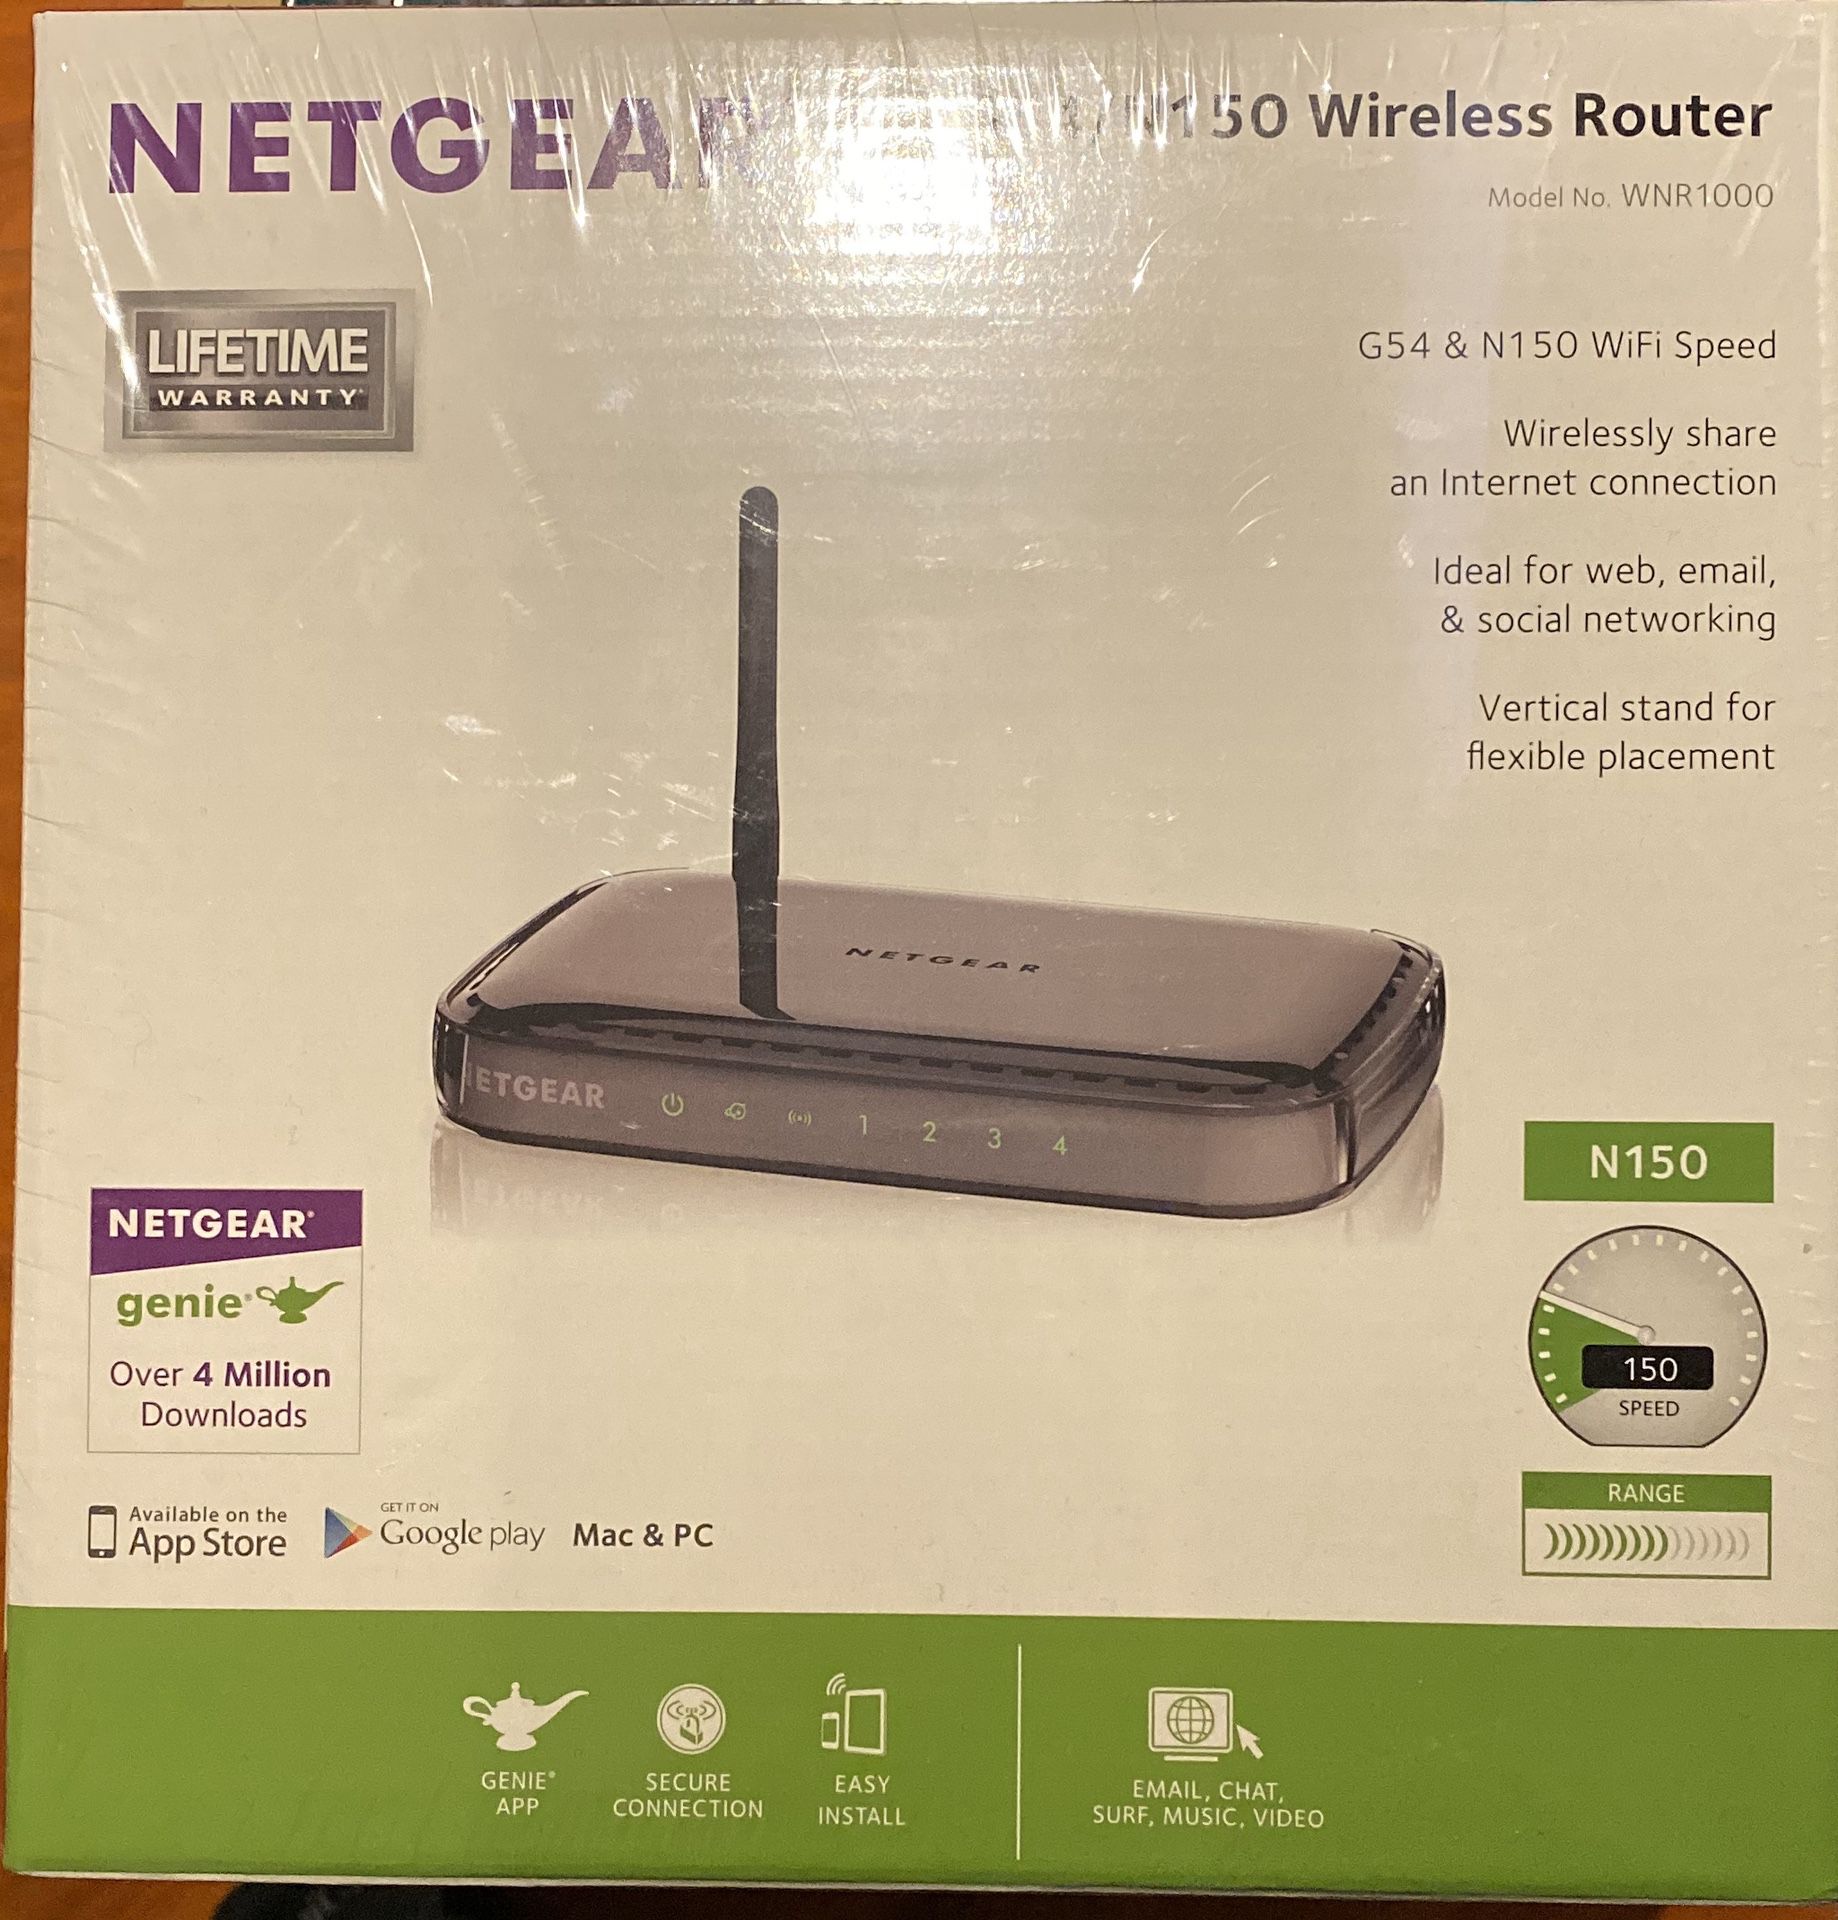 New wireless router